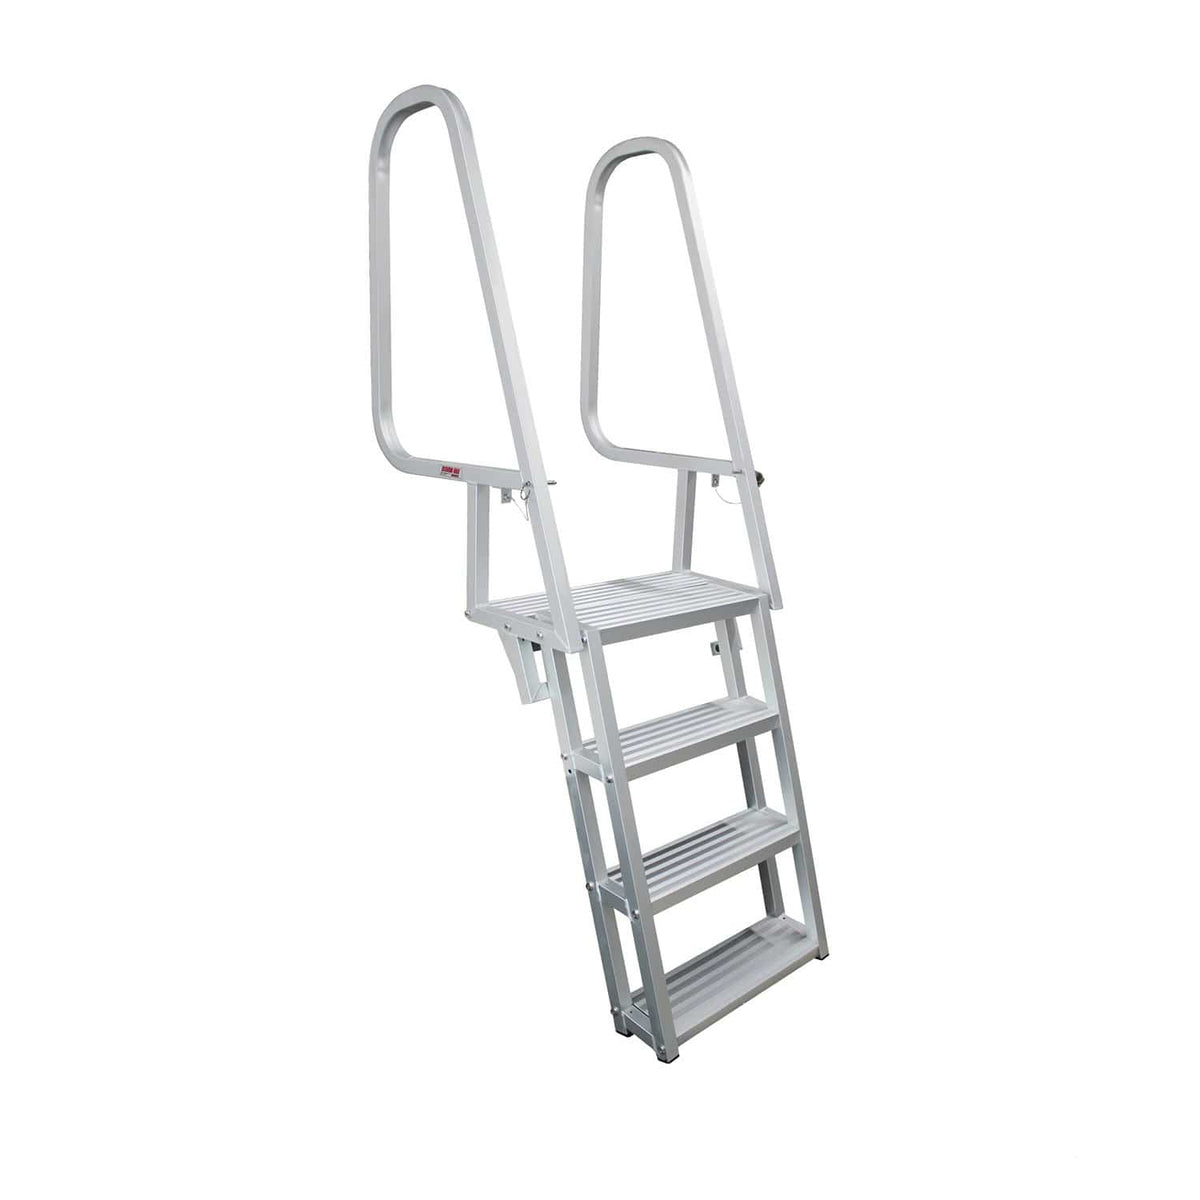 Extreme Max Deluxe Flip-Up Dock Ladder 4-Step #3005.4116